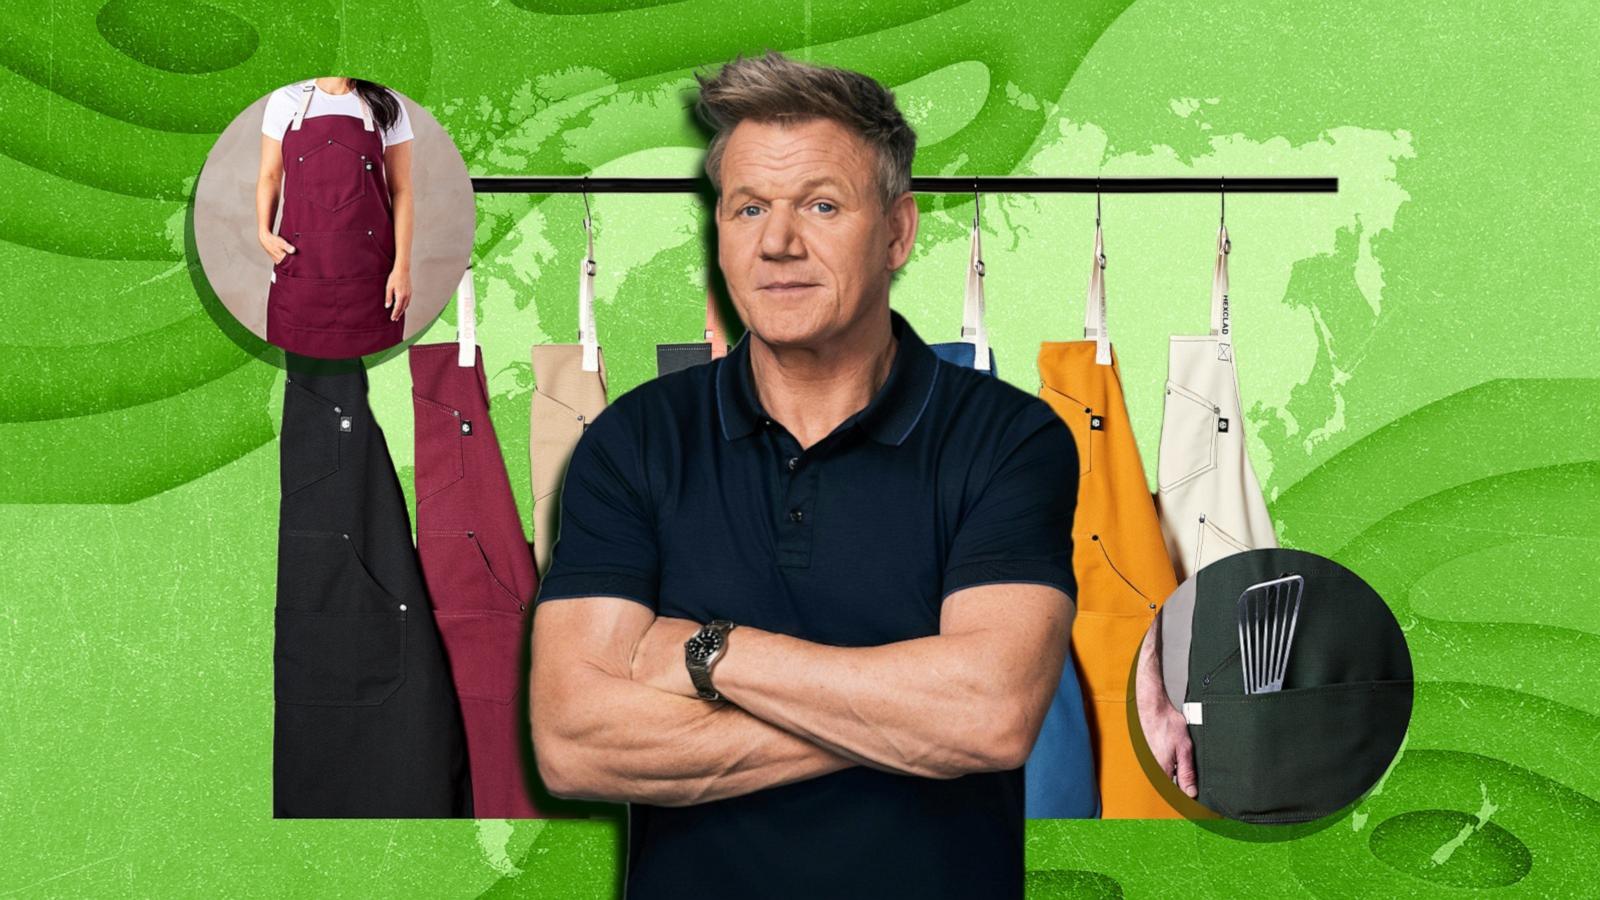 PHOTO: Gordon Ramsay spoke to “Good Morning America” about the new HexClad Eco Modern Apron, made from repurposed plastic water bottles.